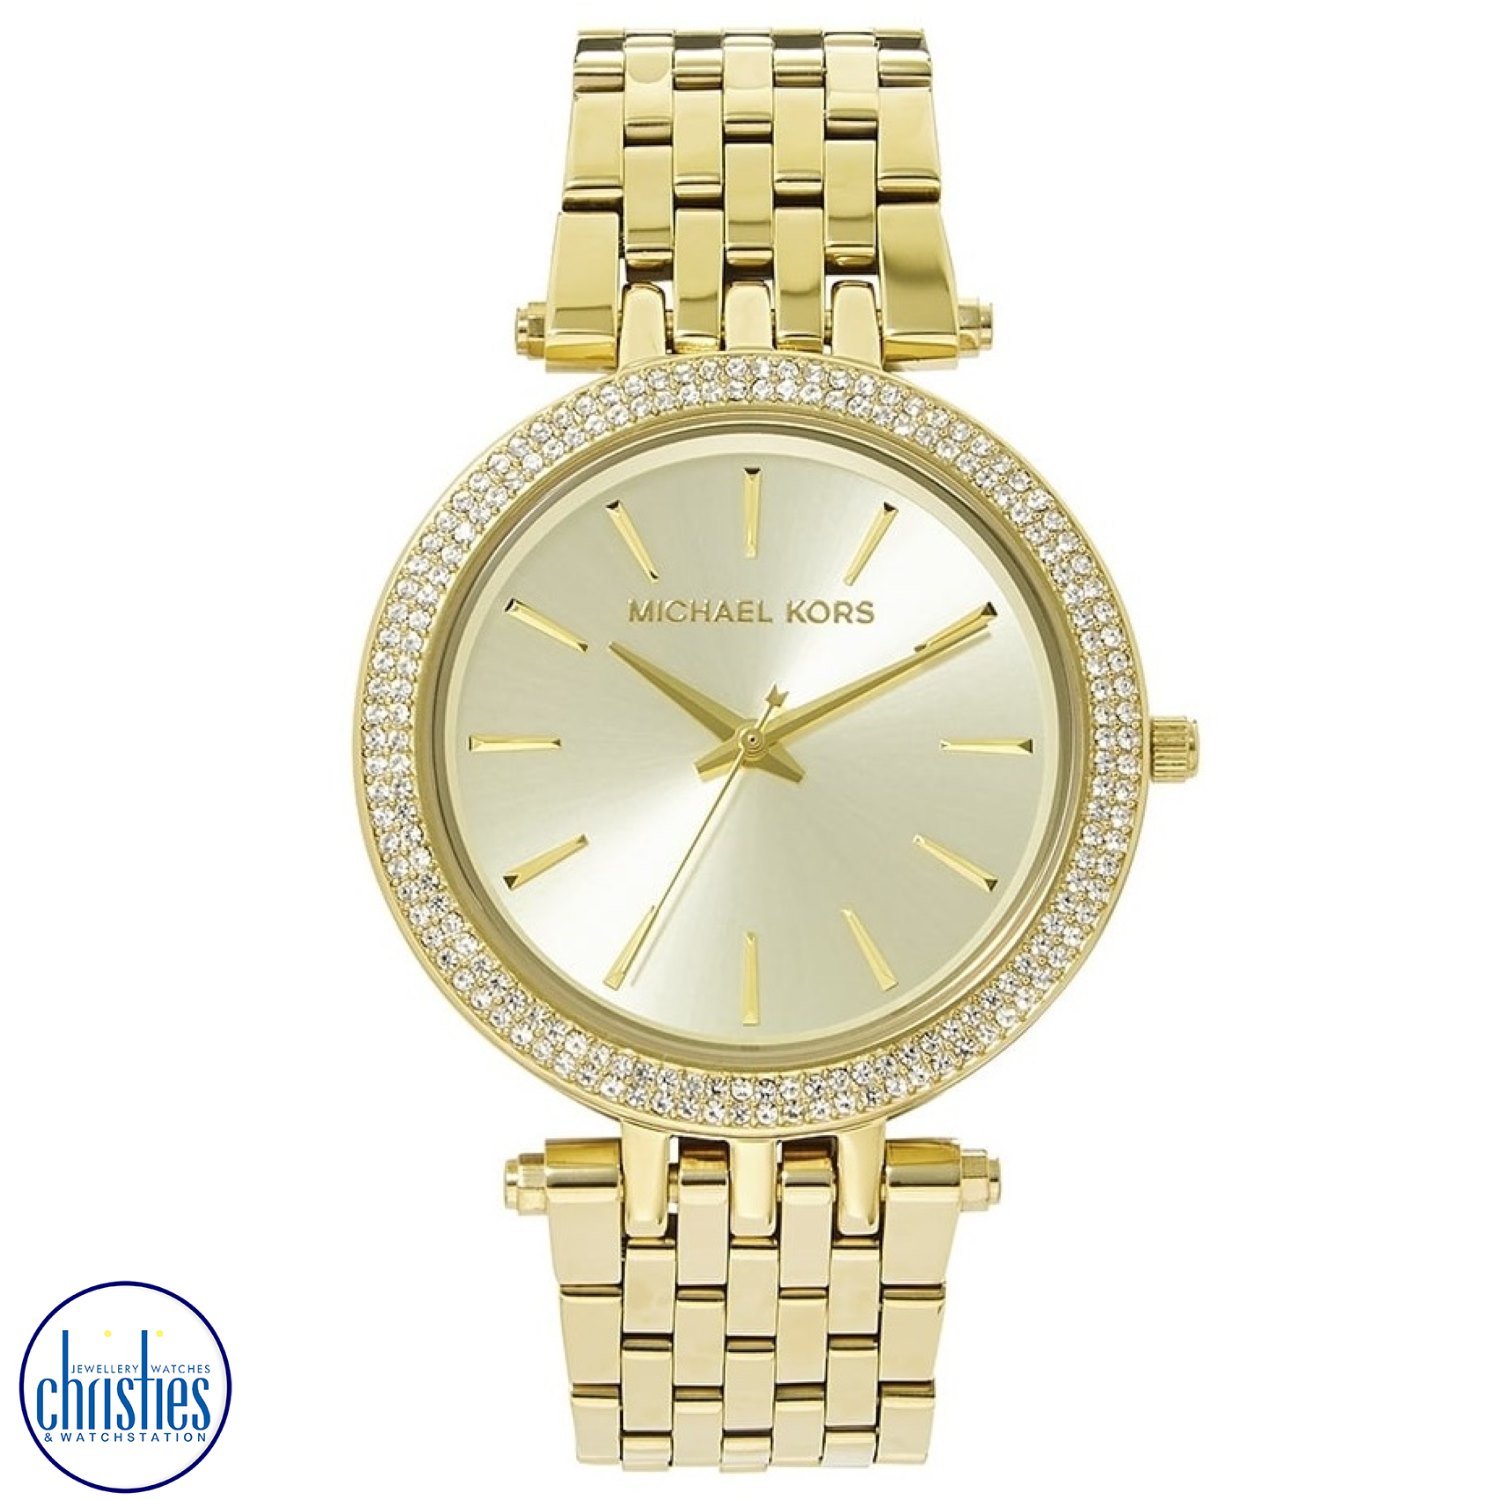 MK3191 Michael Kors Womens Darci Gold Bracelet Watch. Another beautiful time piece from the Ladies Michael Kors collection. This Darci model comes in a stunning IP gold-plated design with a glittering stone set bezel. It is set around an elegant champagne